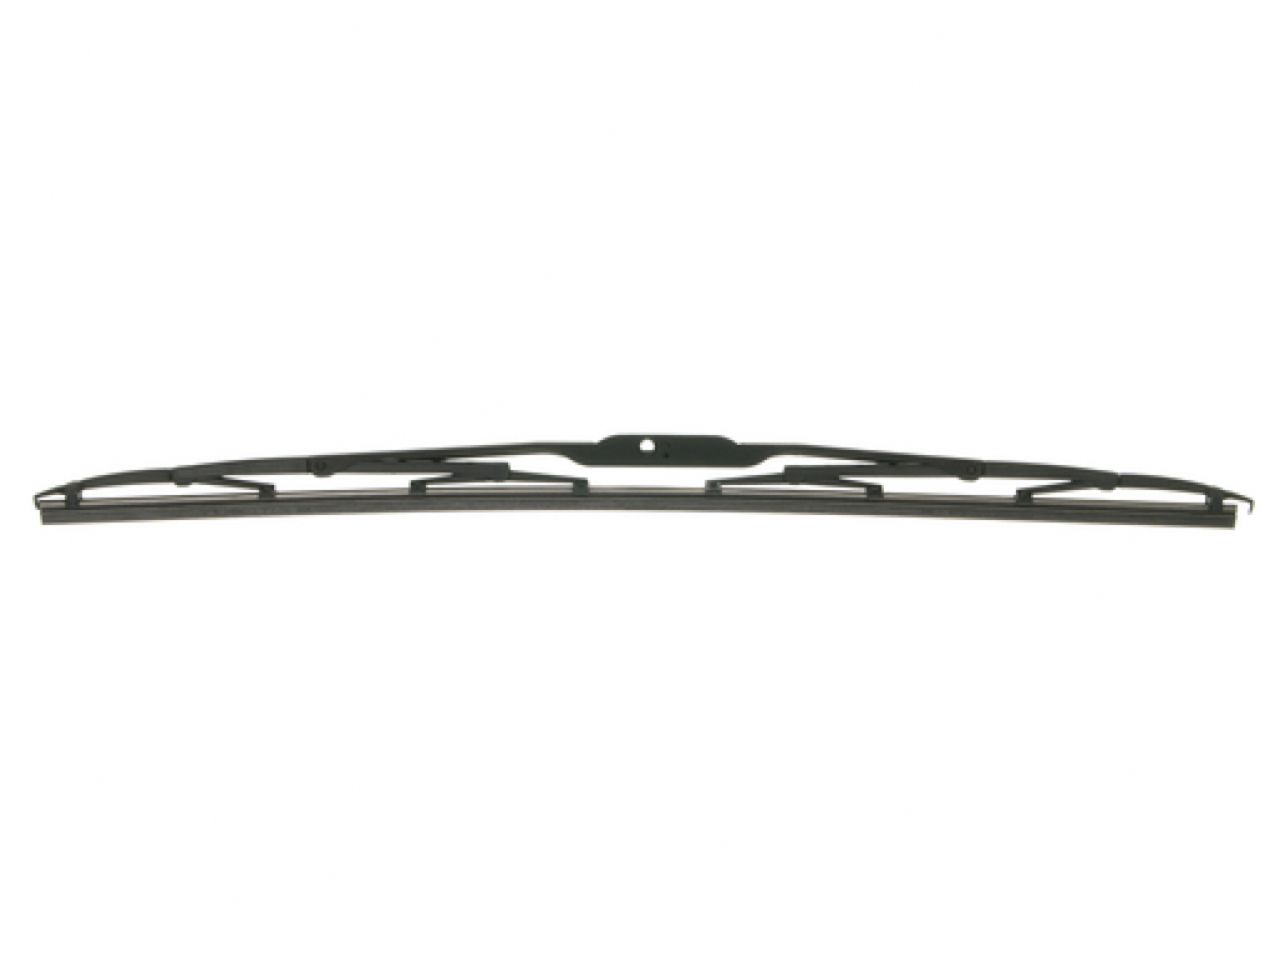 Anco Windshield Wipers 31-22 Item Image